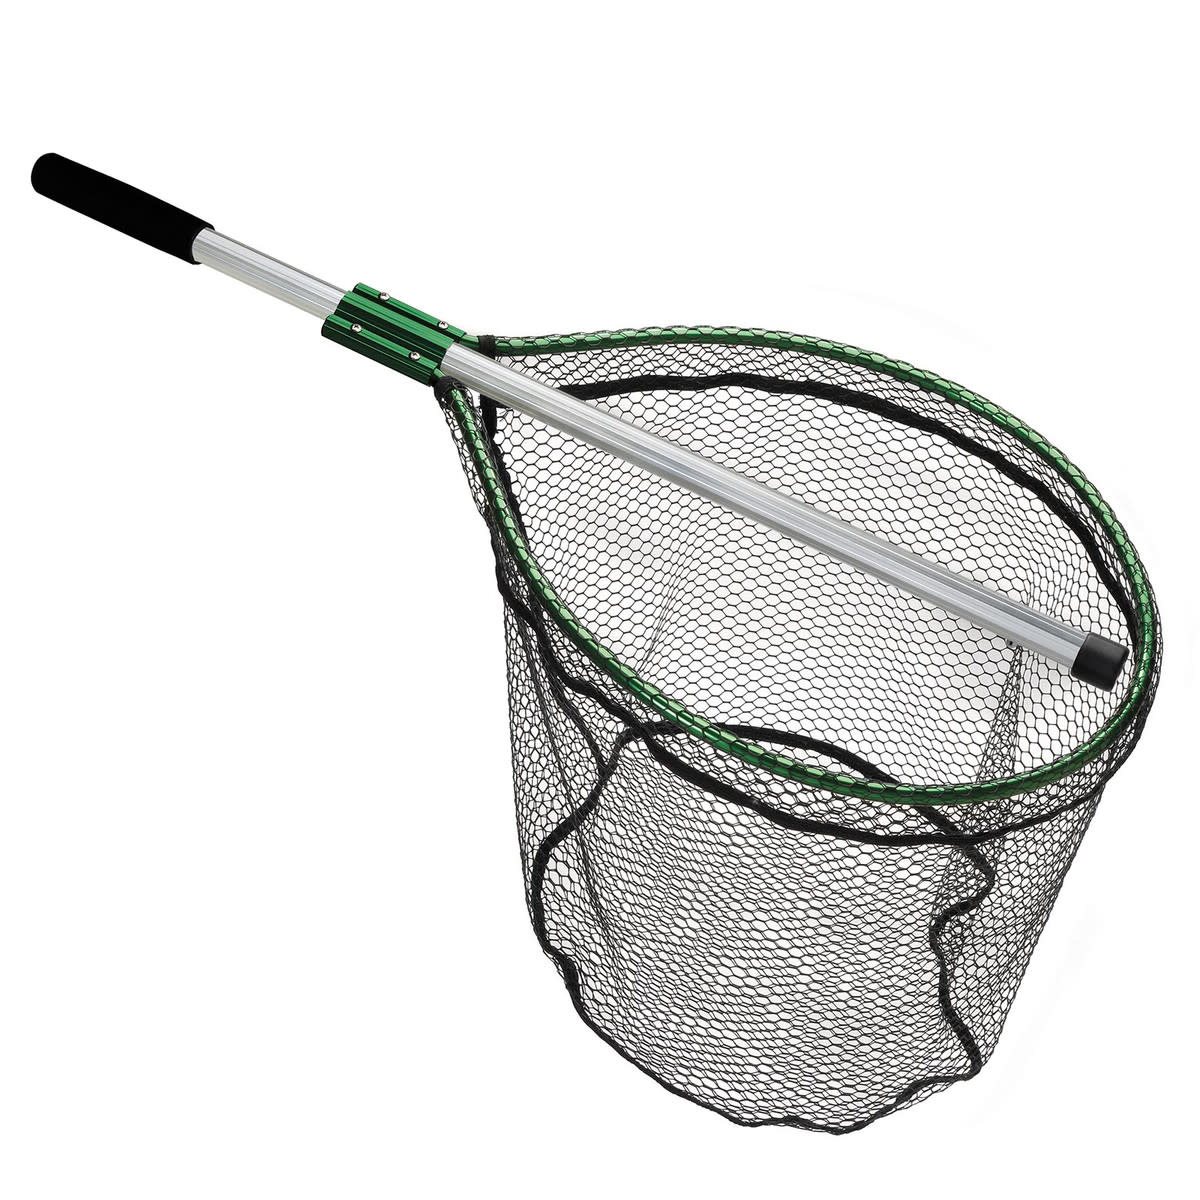 G. PUCCI & SONS, INC. BECKMAN NET 31 X 36 BOW, COATED, 40 DEEP, 4'-7'  EXTENDABLE HNDL GREEN/SILVER - All Seasons Sports